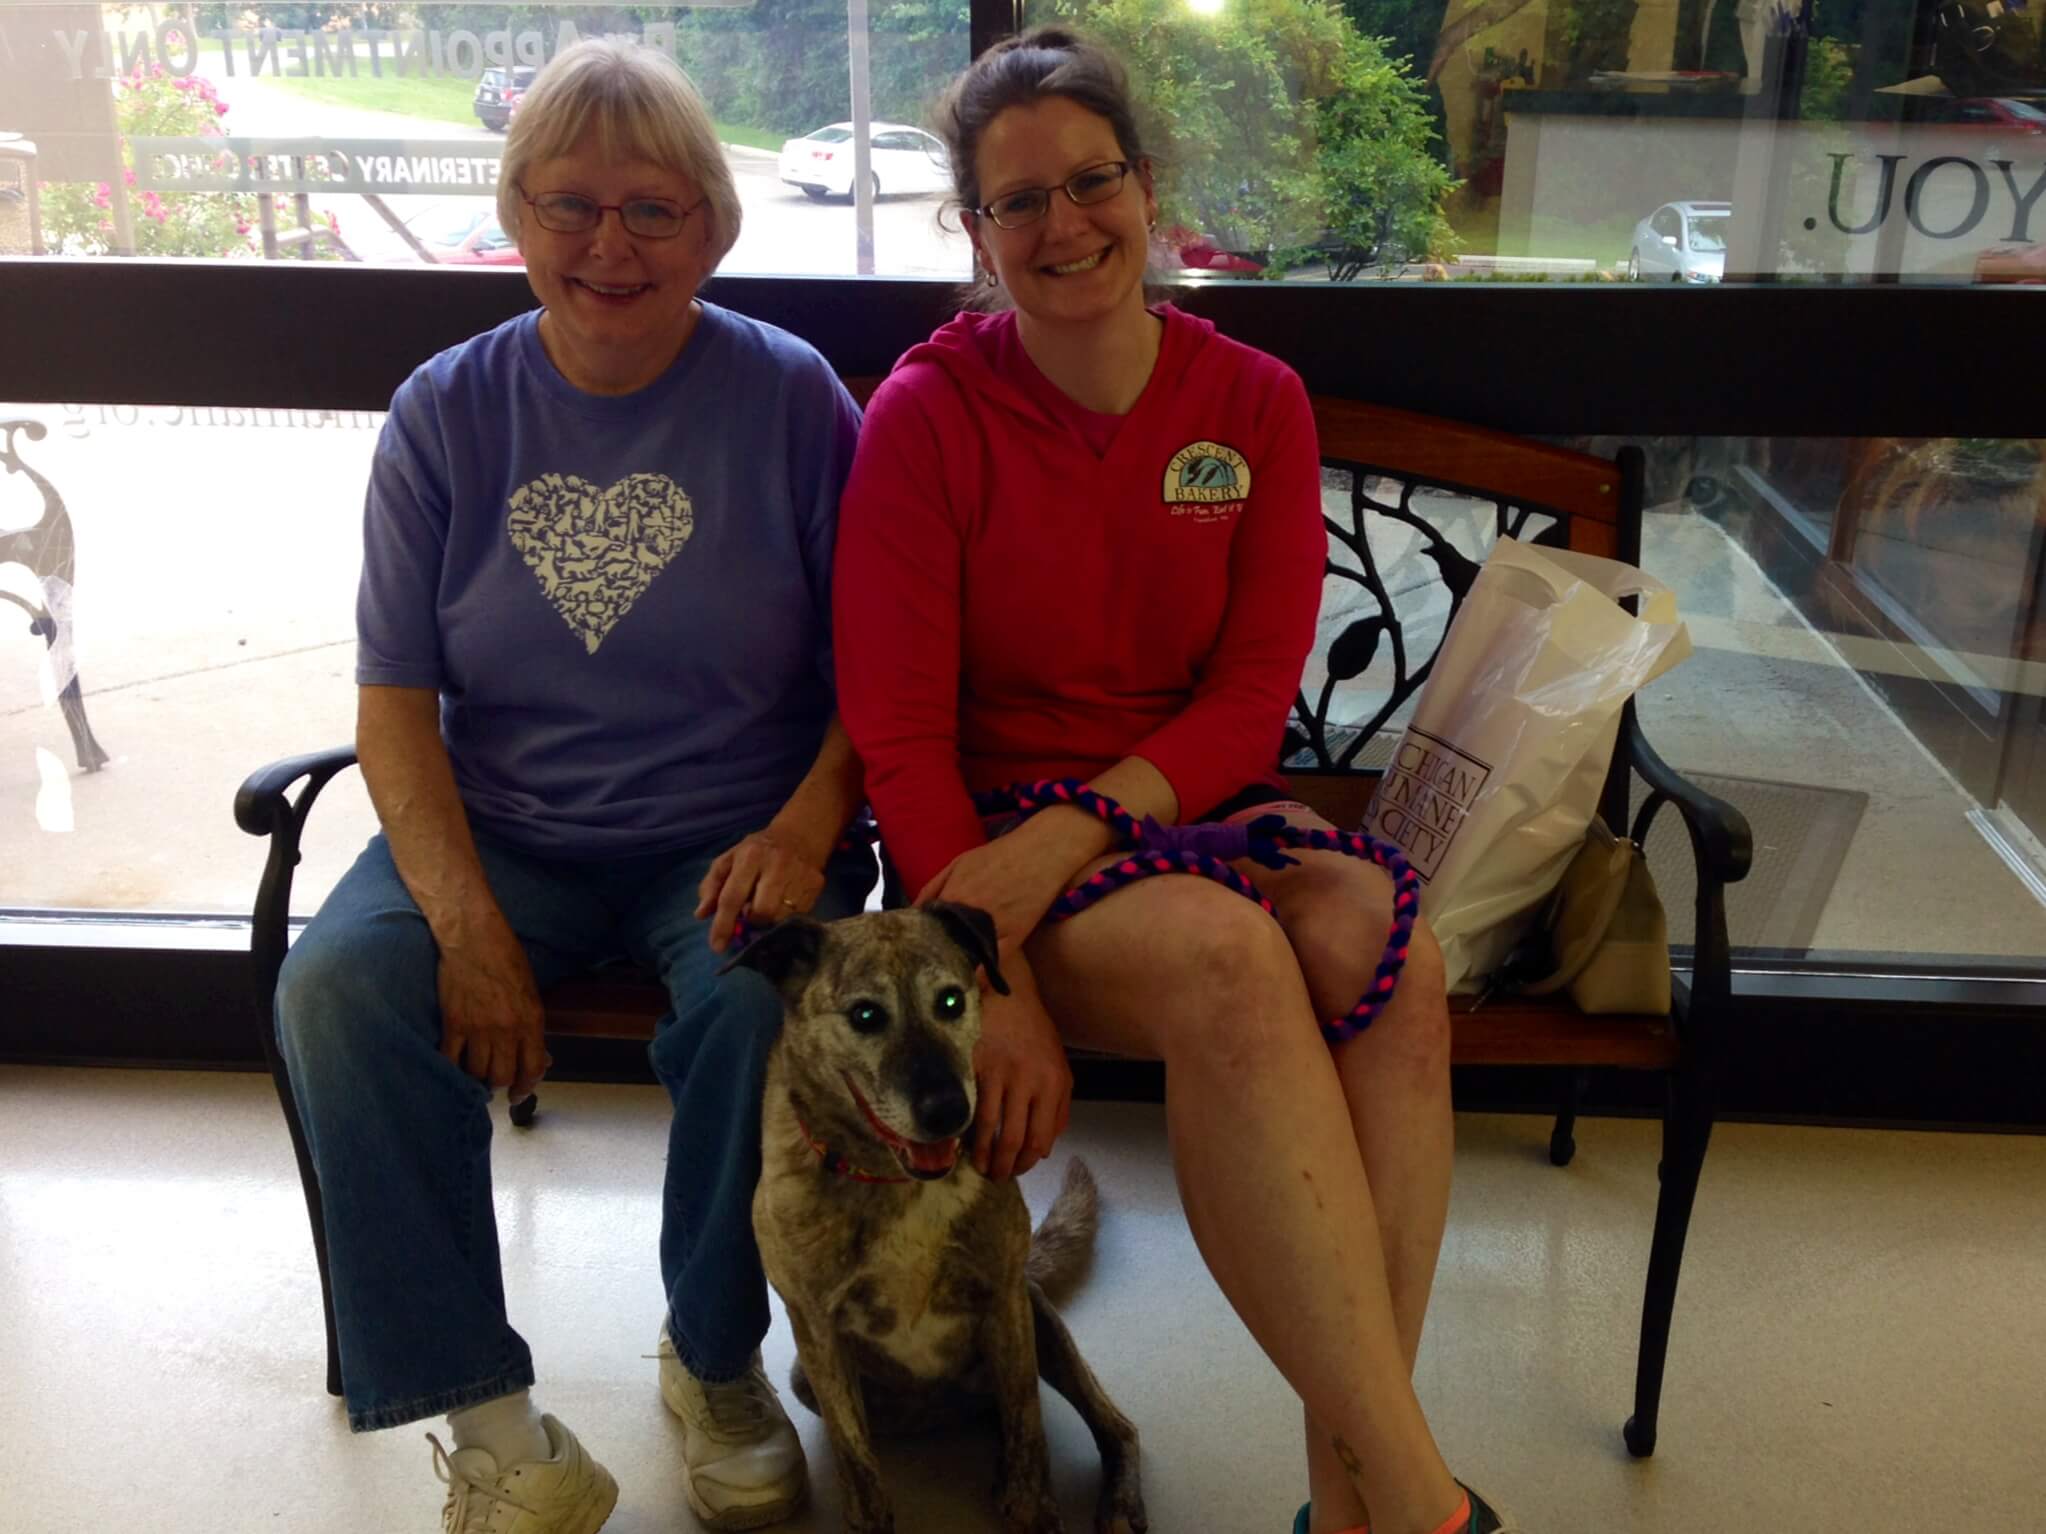 Senior dog Miss Brittney had been with us for quite a while, and found her perfect home thanks to our AARP partnership!